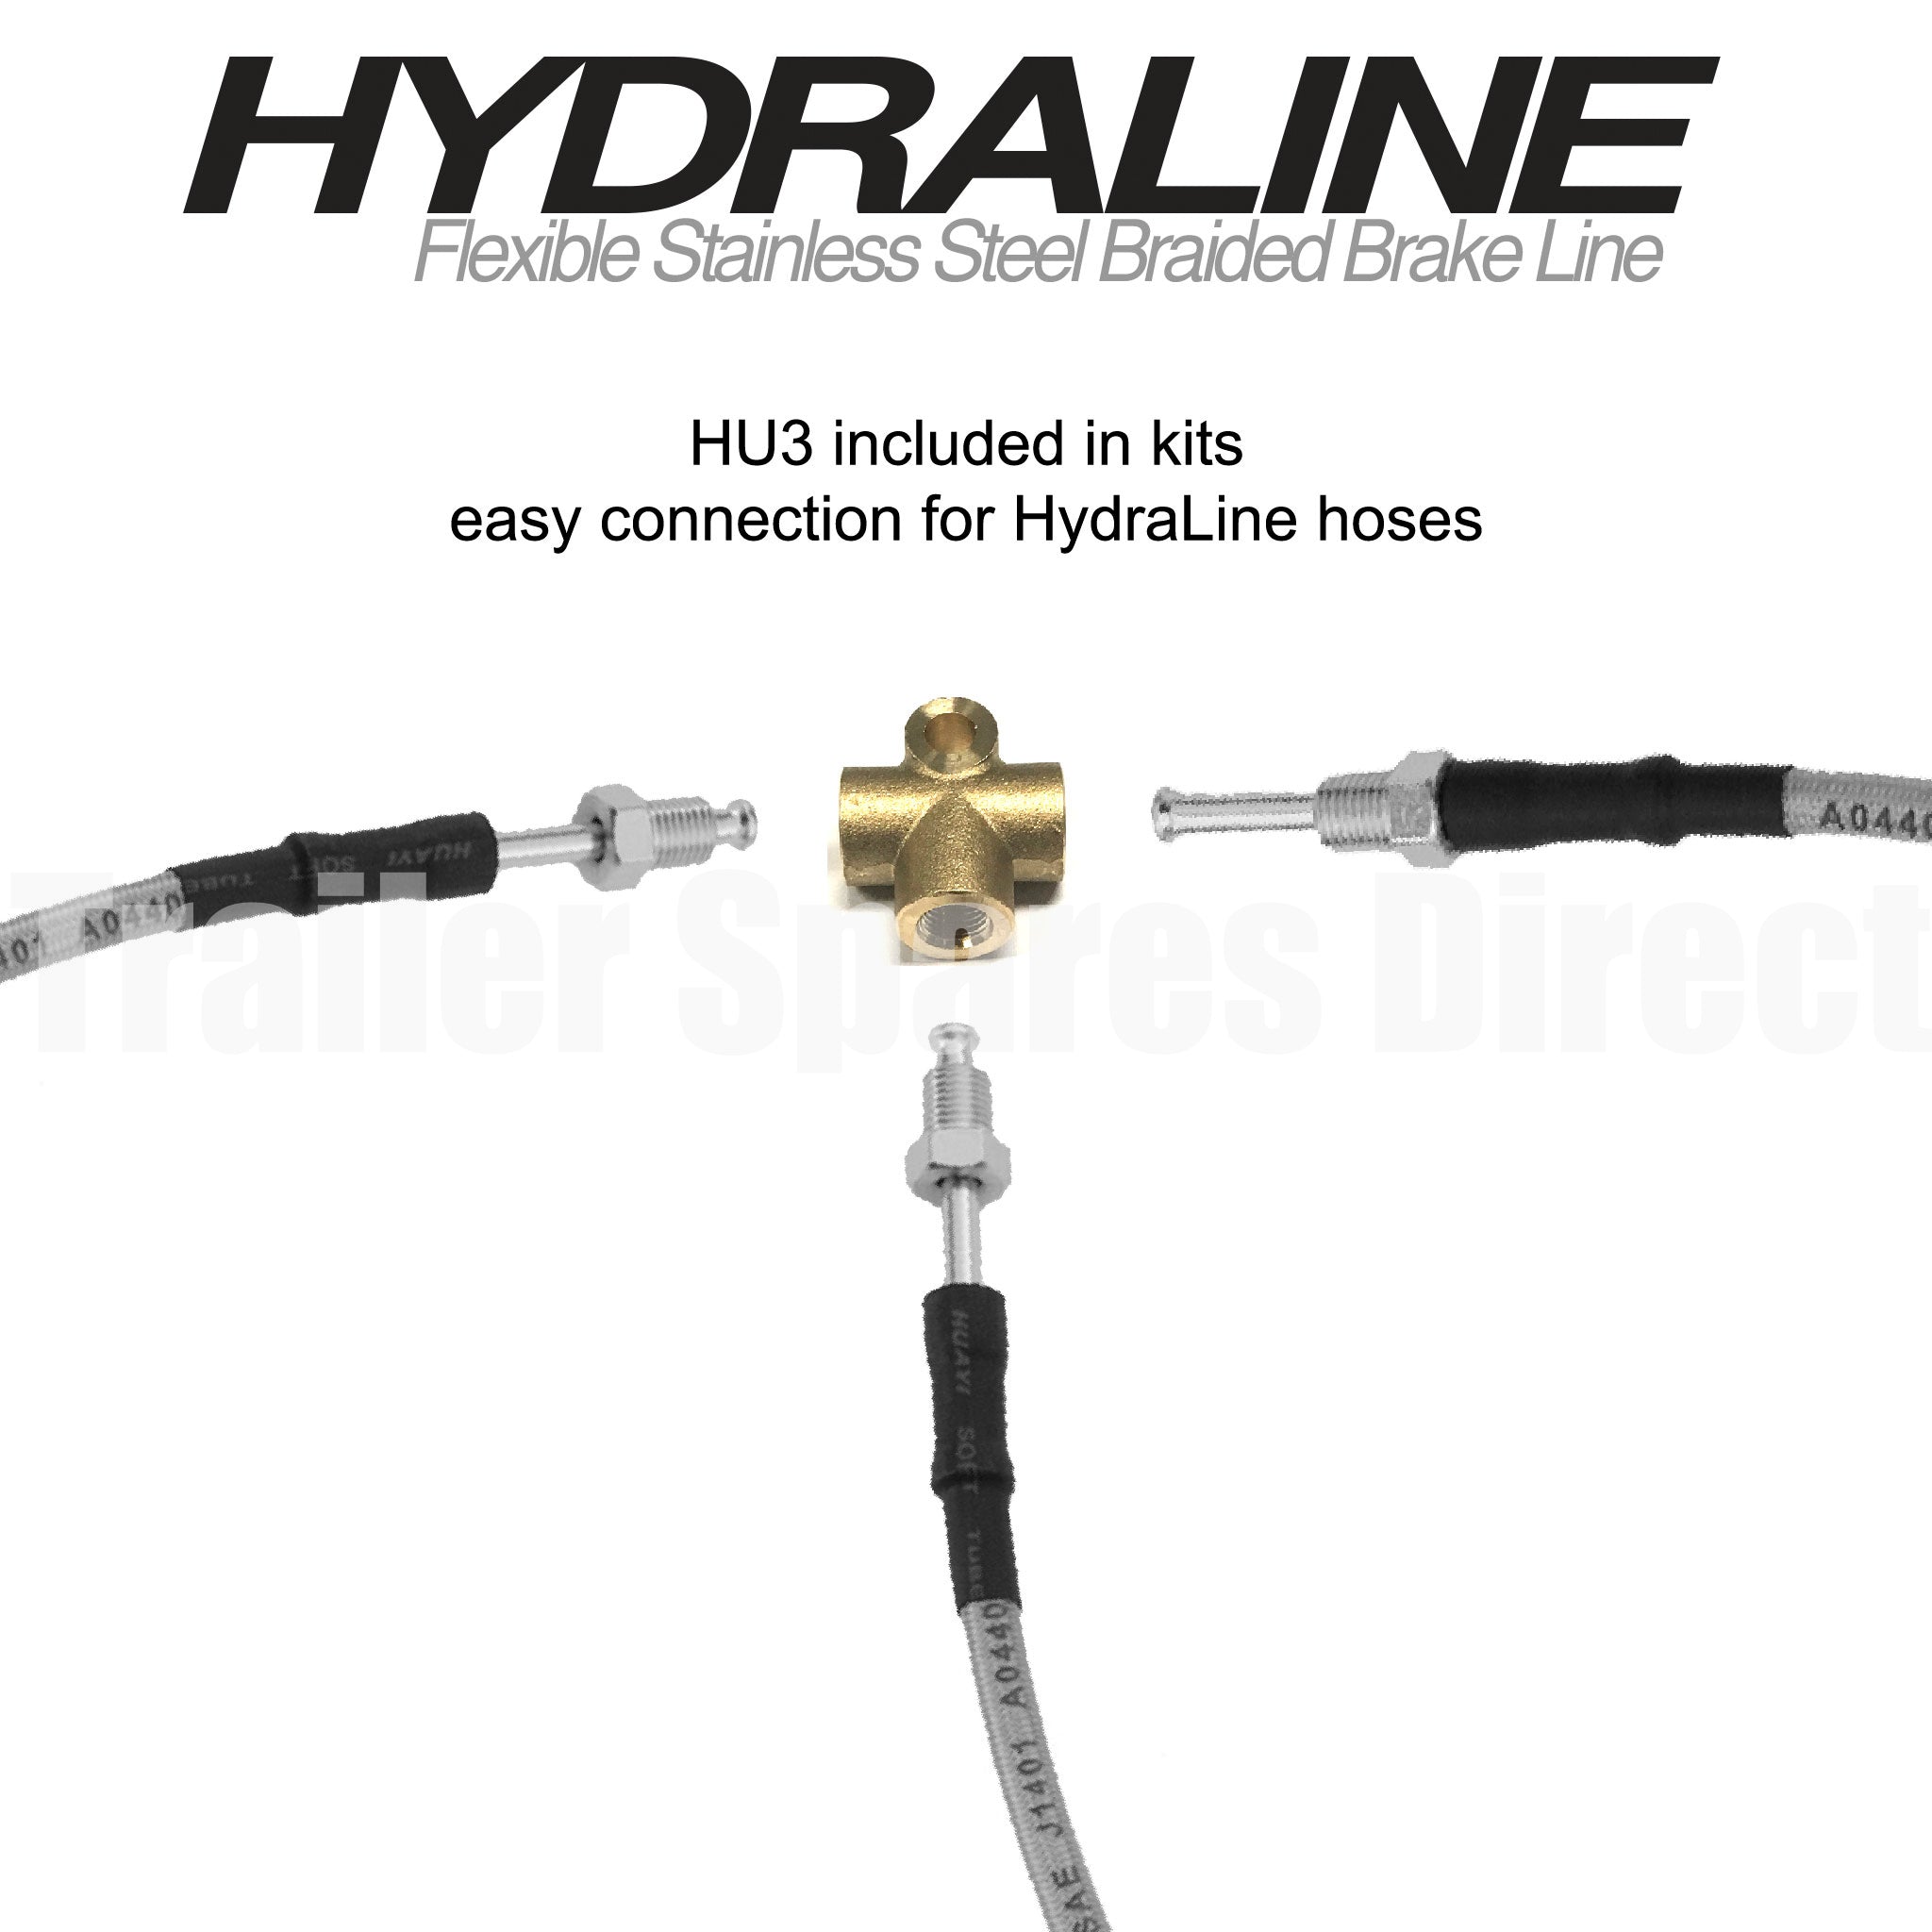 Single axle HydraLine kit with 2500mm lead line